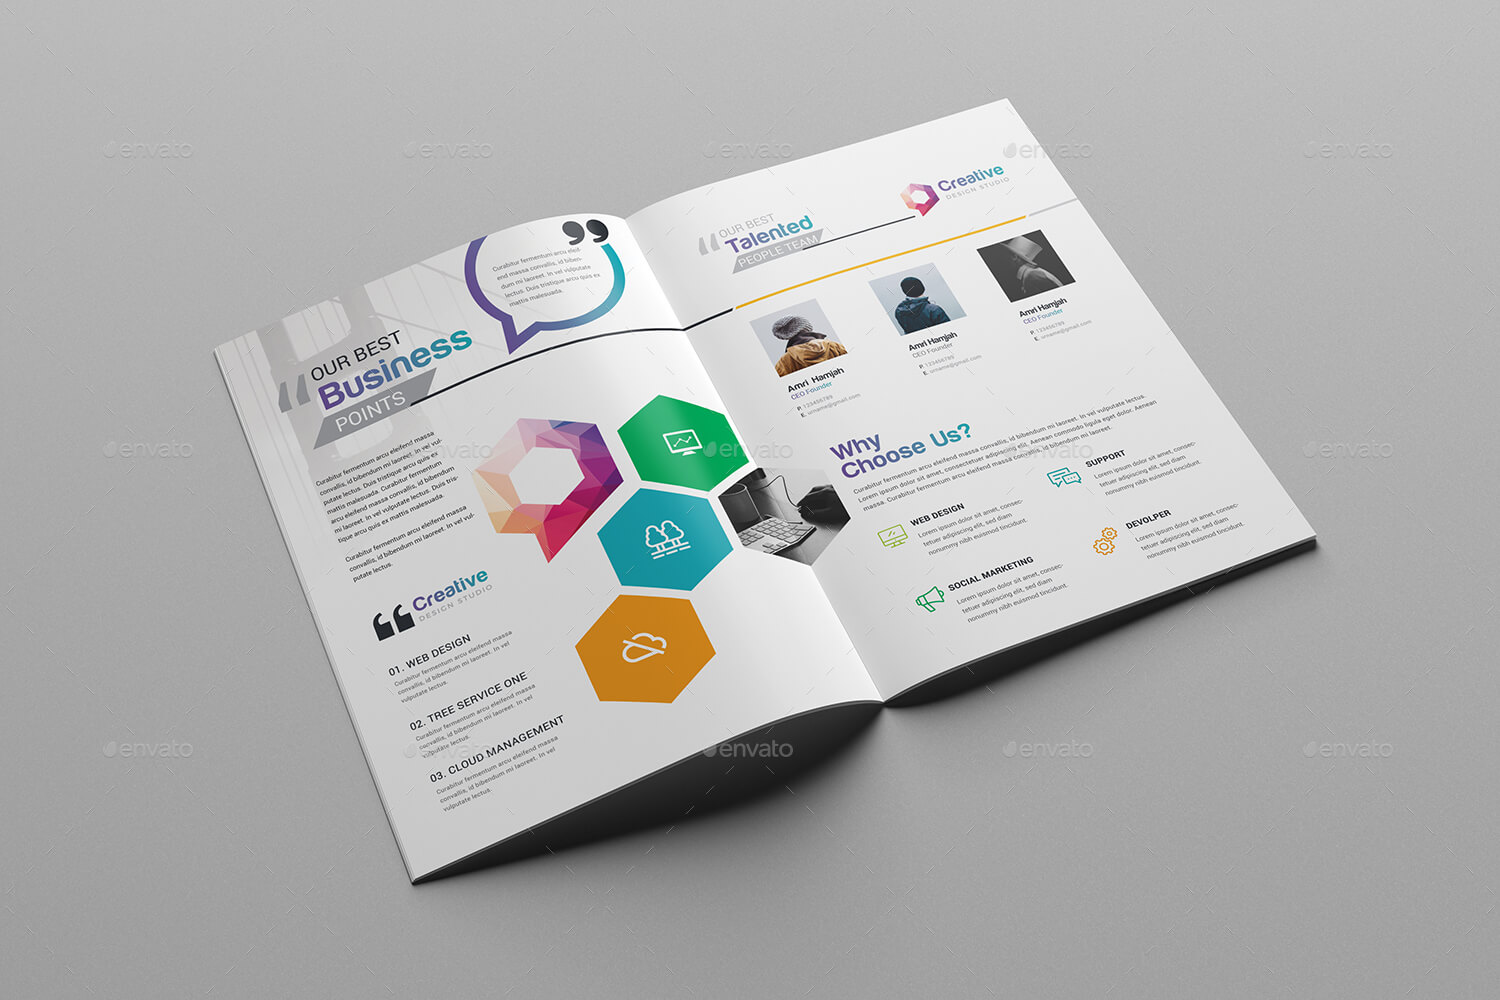 027 Fold Brochure Template Free Download Psd 02 Bifold Image Intended For Two Fold Brochure Template Psd